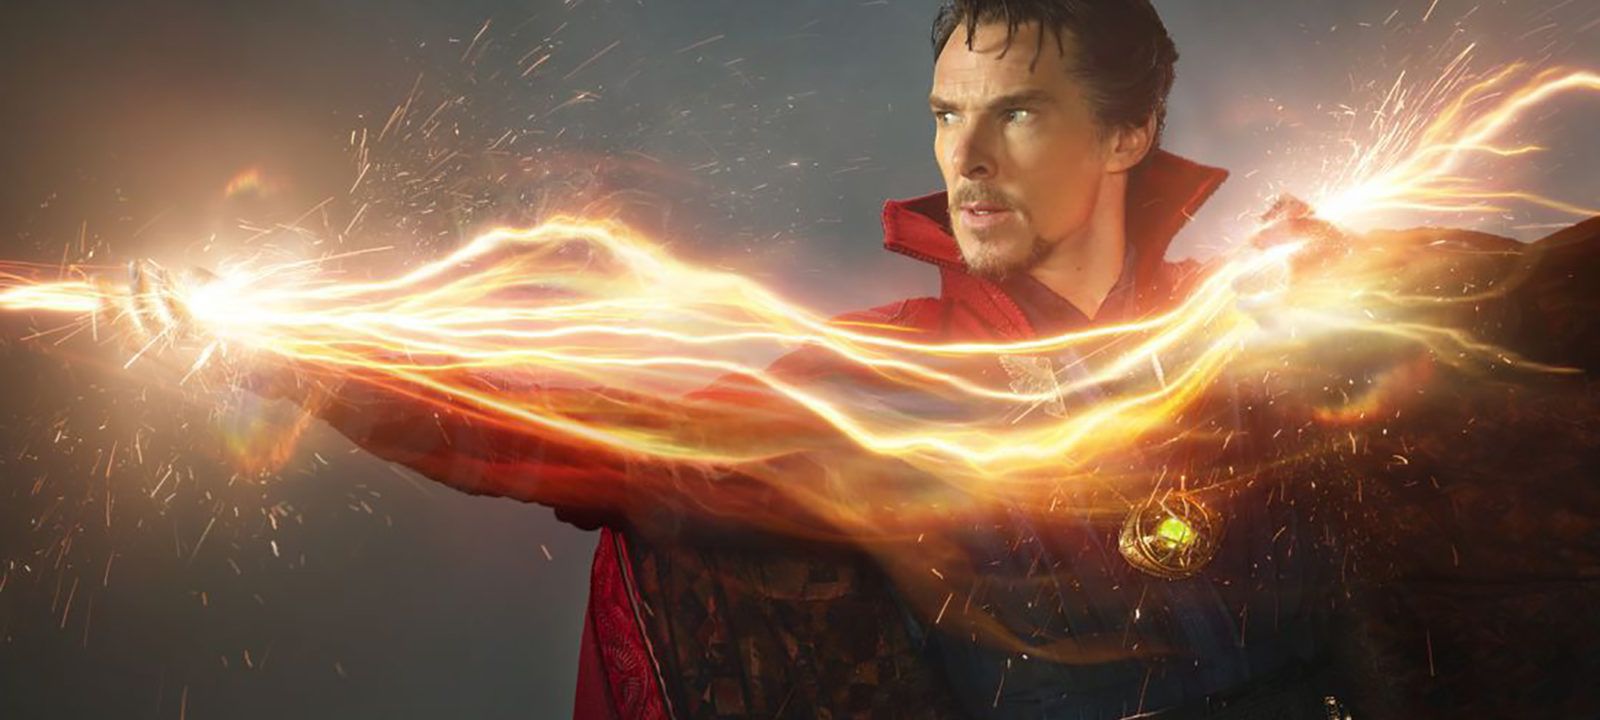 WATCH: First Look at Doctor Strange's Cloak of Levitation in Action